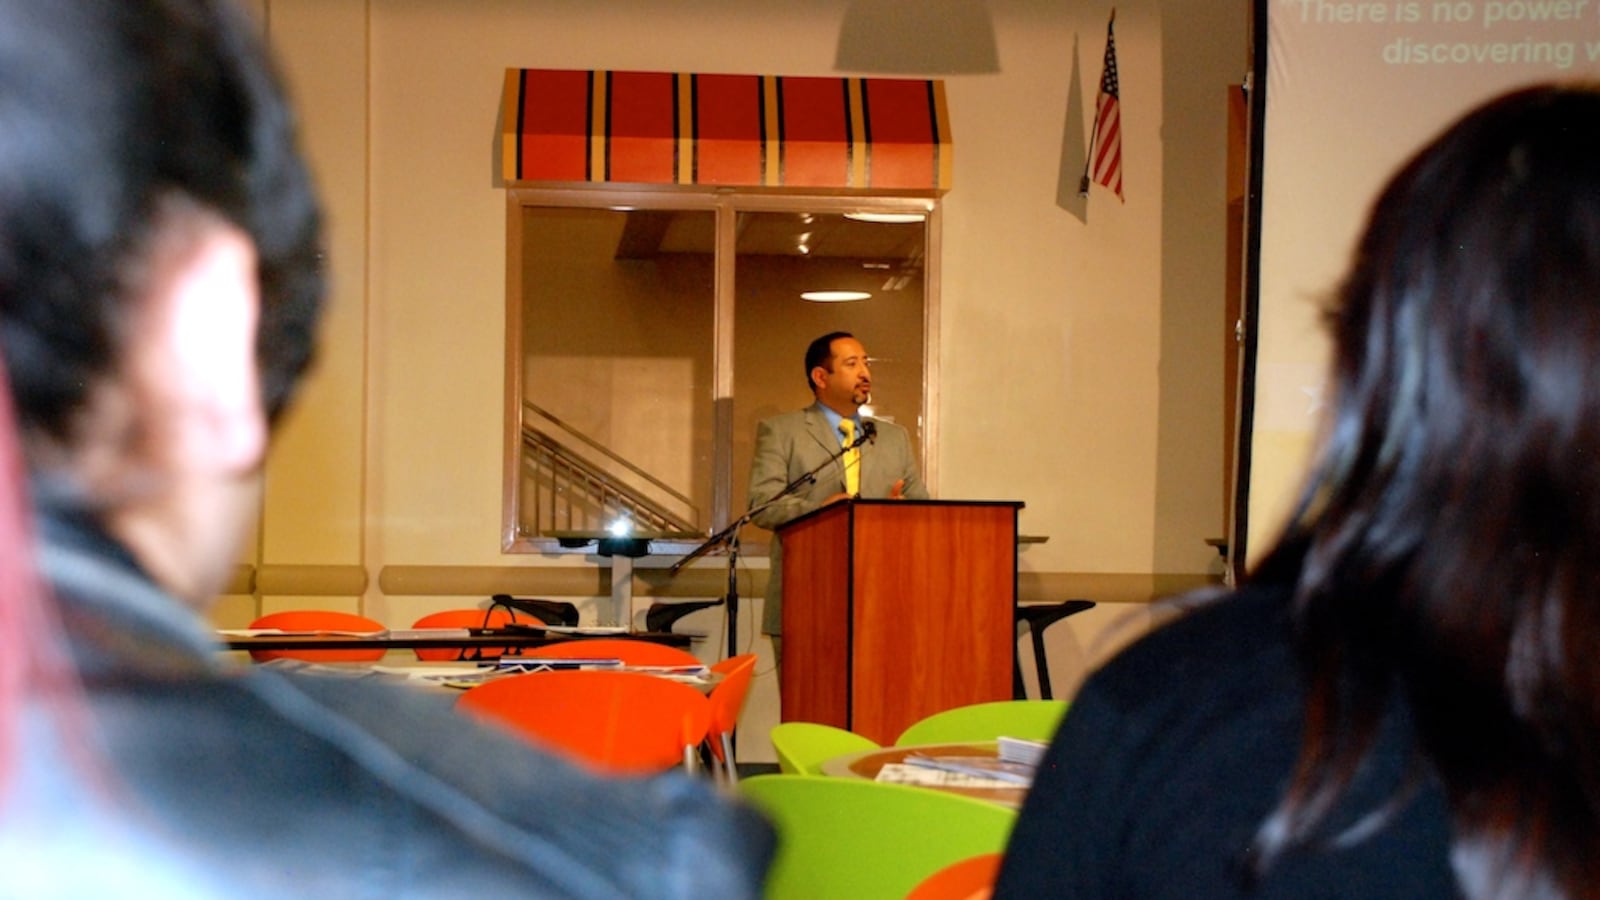 Adams 14 is on an upward trajectory, Superintendent Pat Sanchez told an audience of about 100 Thursday at Adams City High School. But the district needs the help of the community.